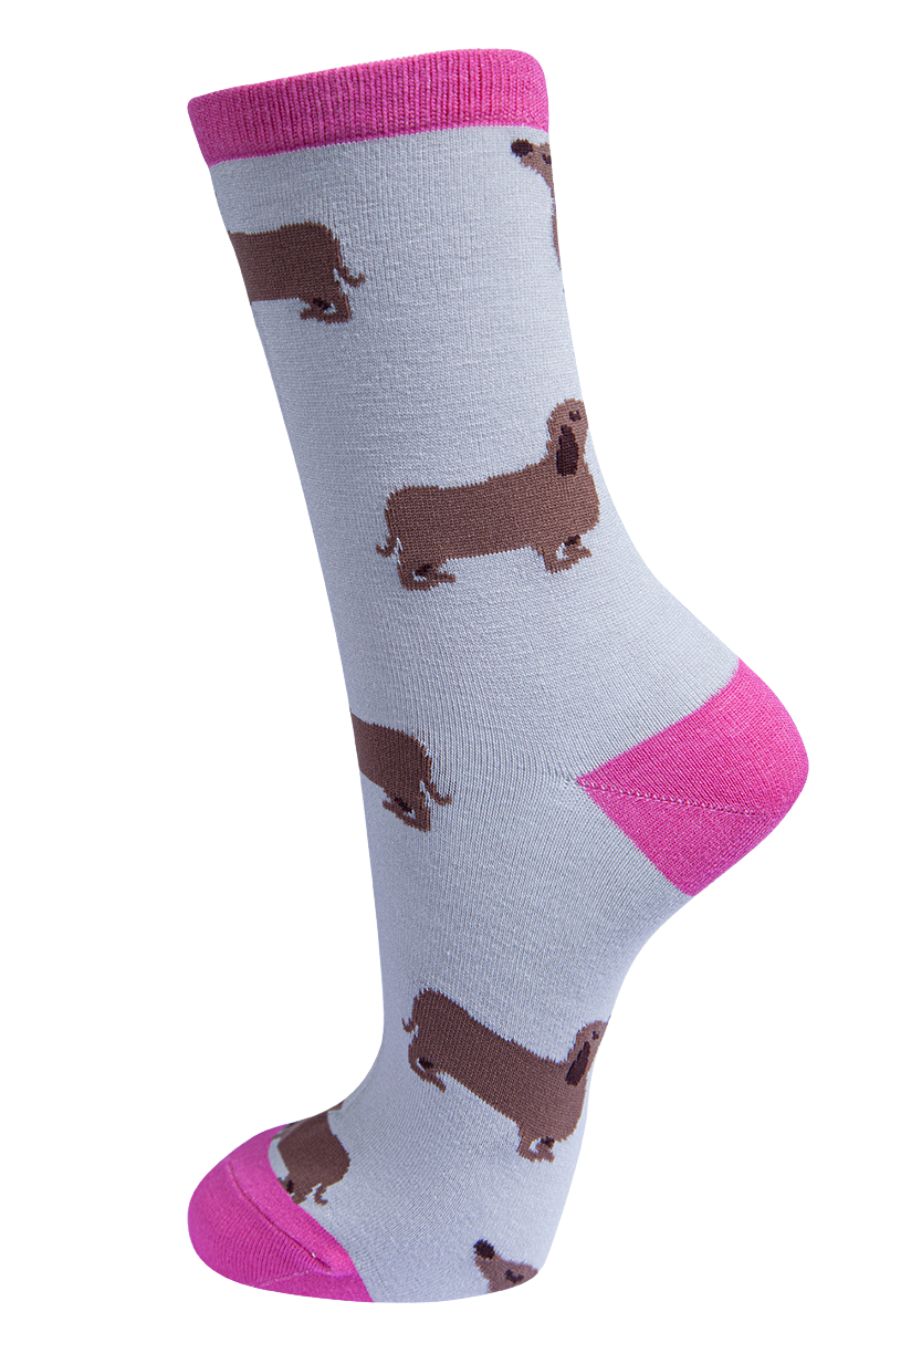 light grey socks with hot pink heel, toe and cuff with a pattern of beige sausage dogs all over